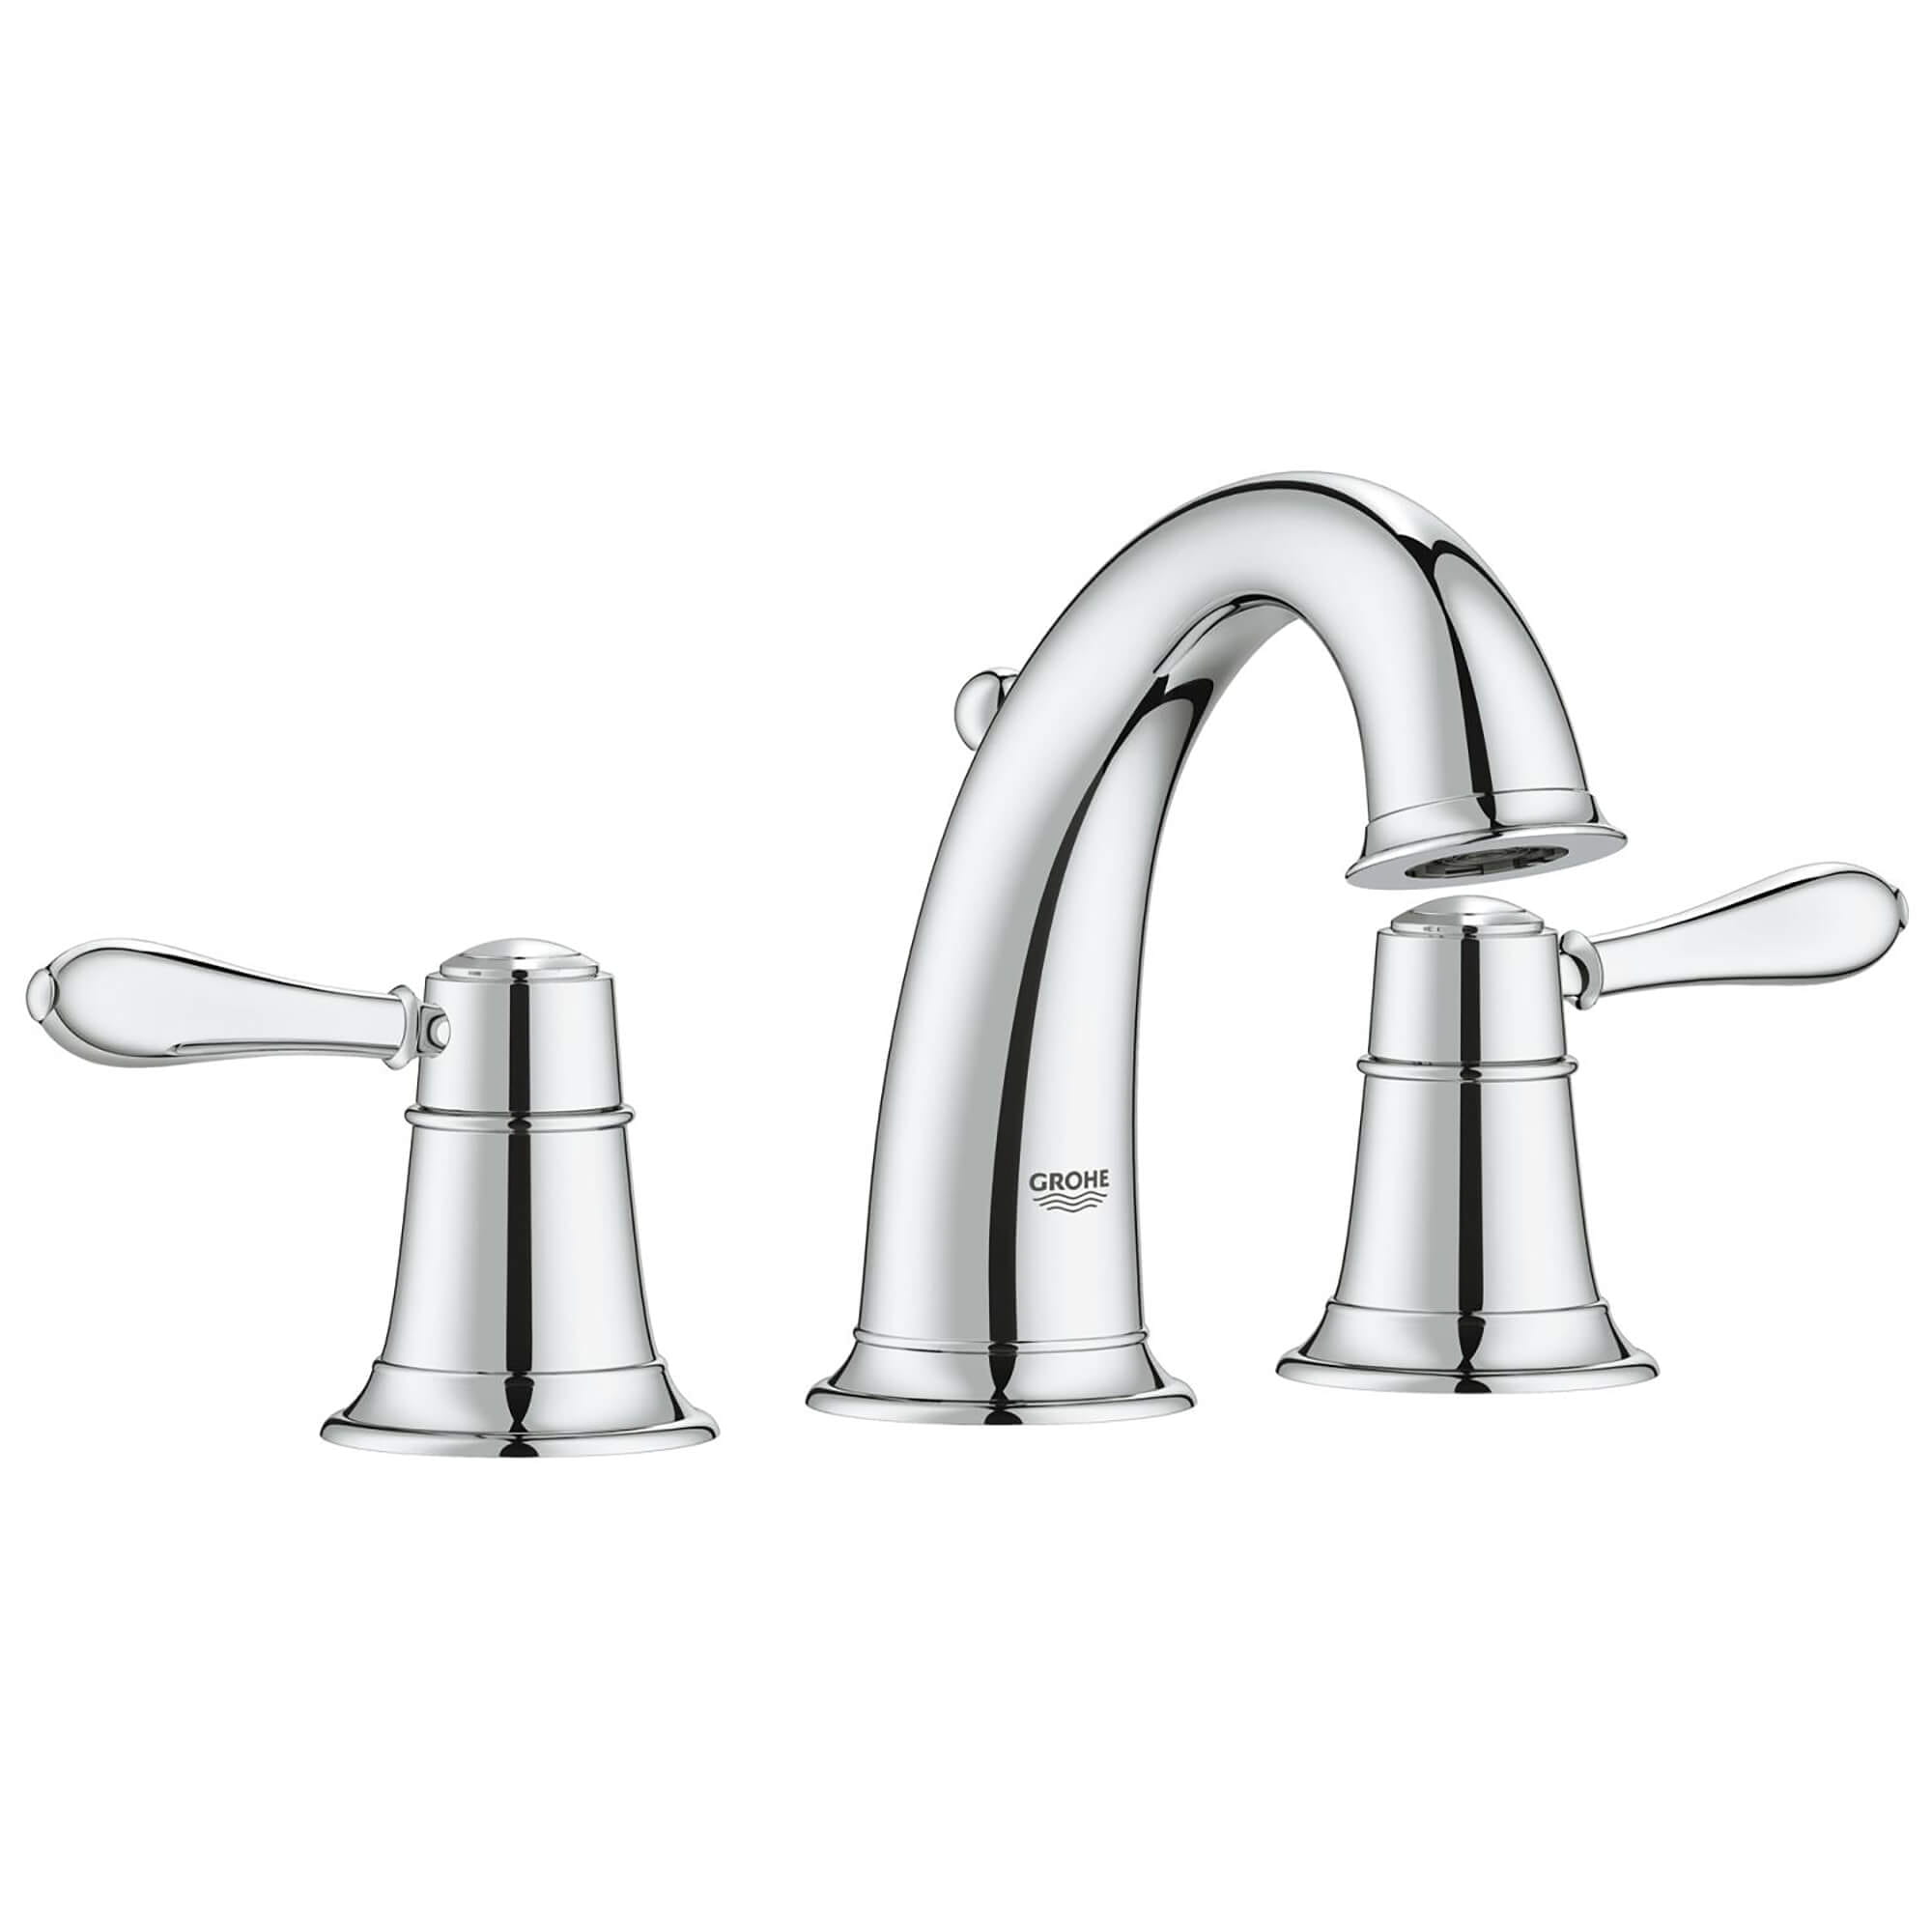 Grohe 20 424 Fairborn Centerset Bathroom Faucet with SilkMove/® Free Metal Pop- Starlight Chrome